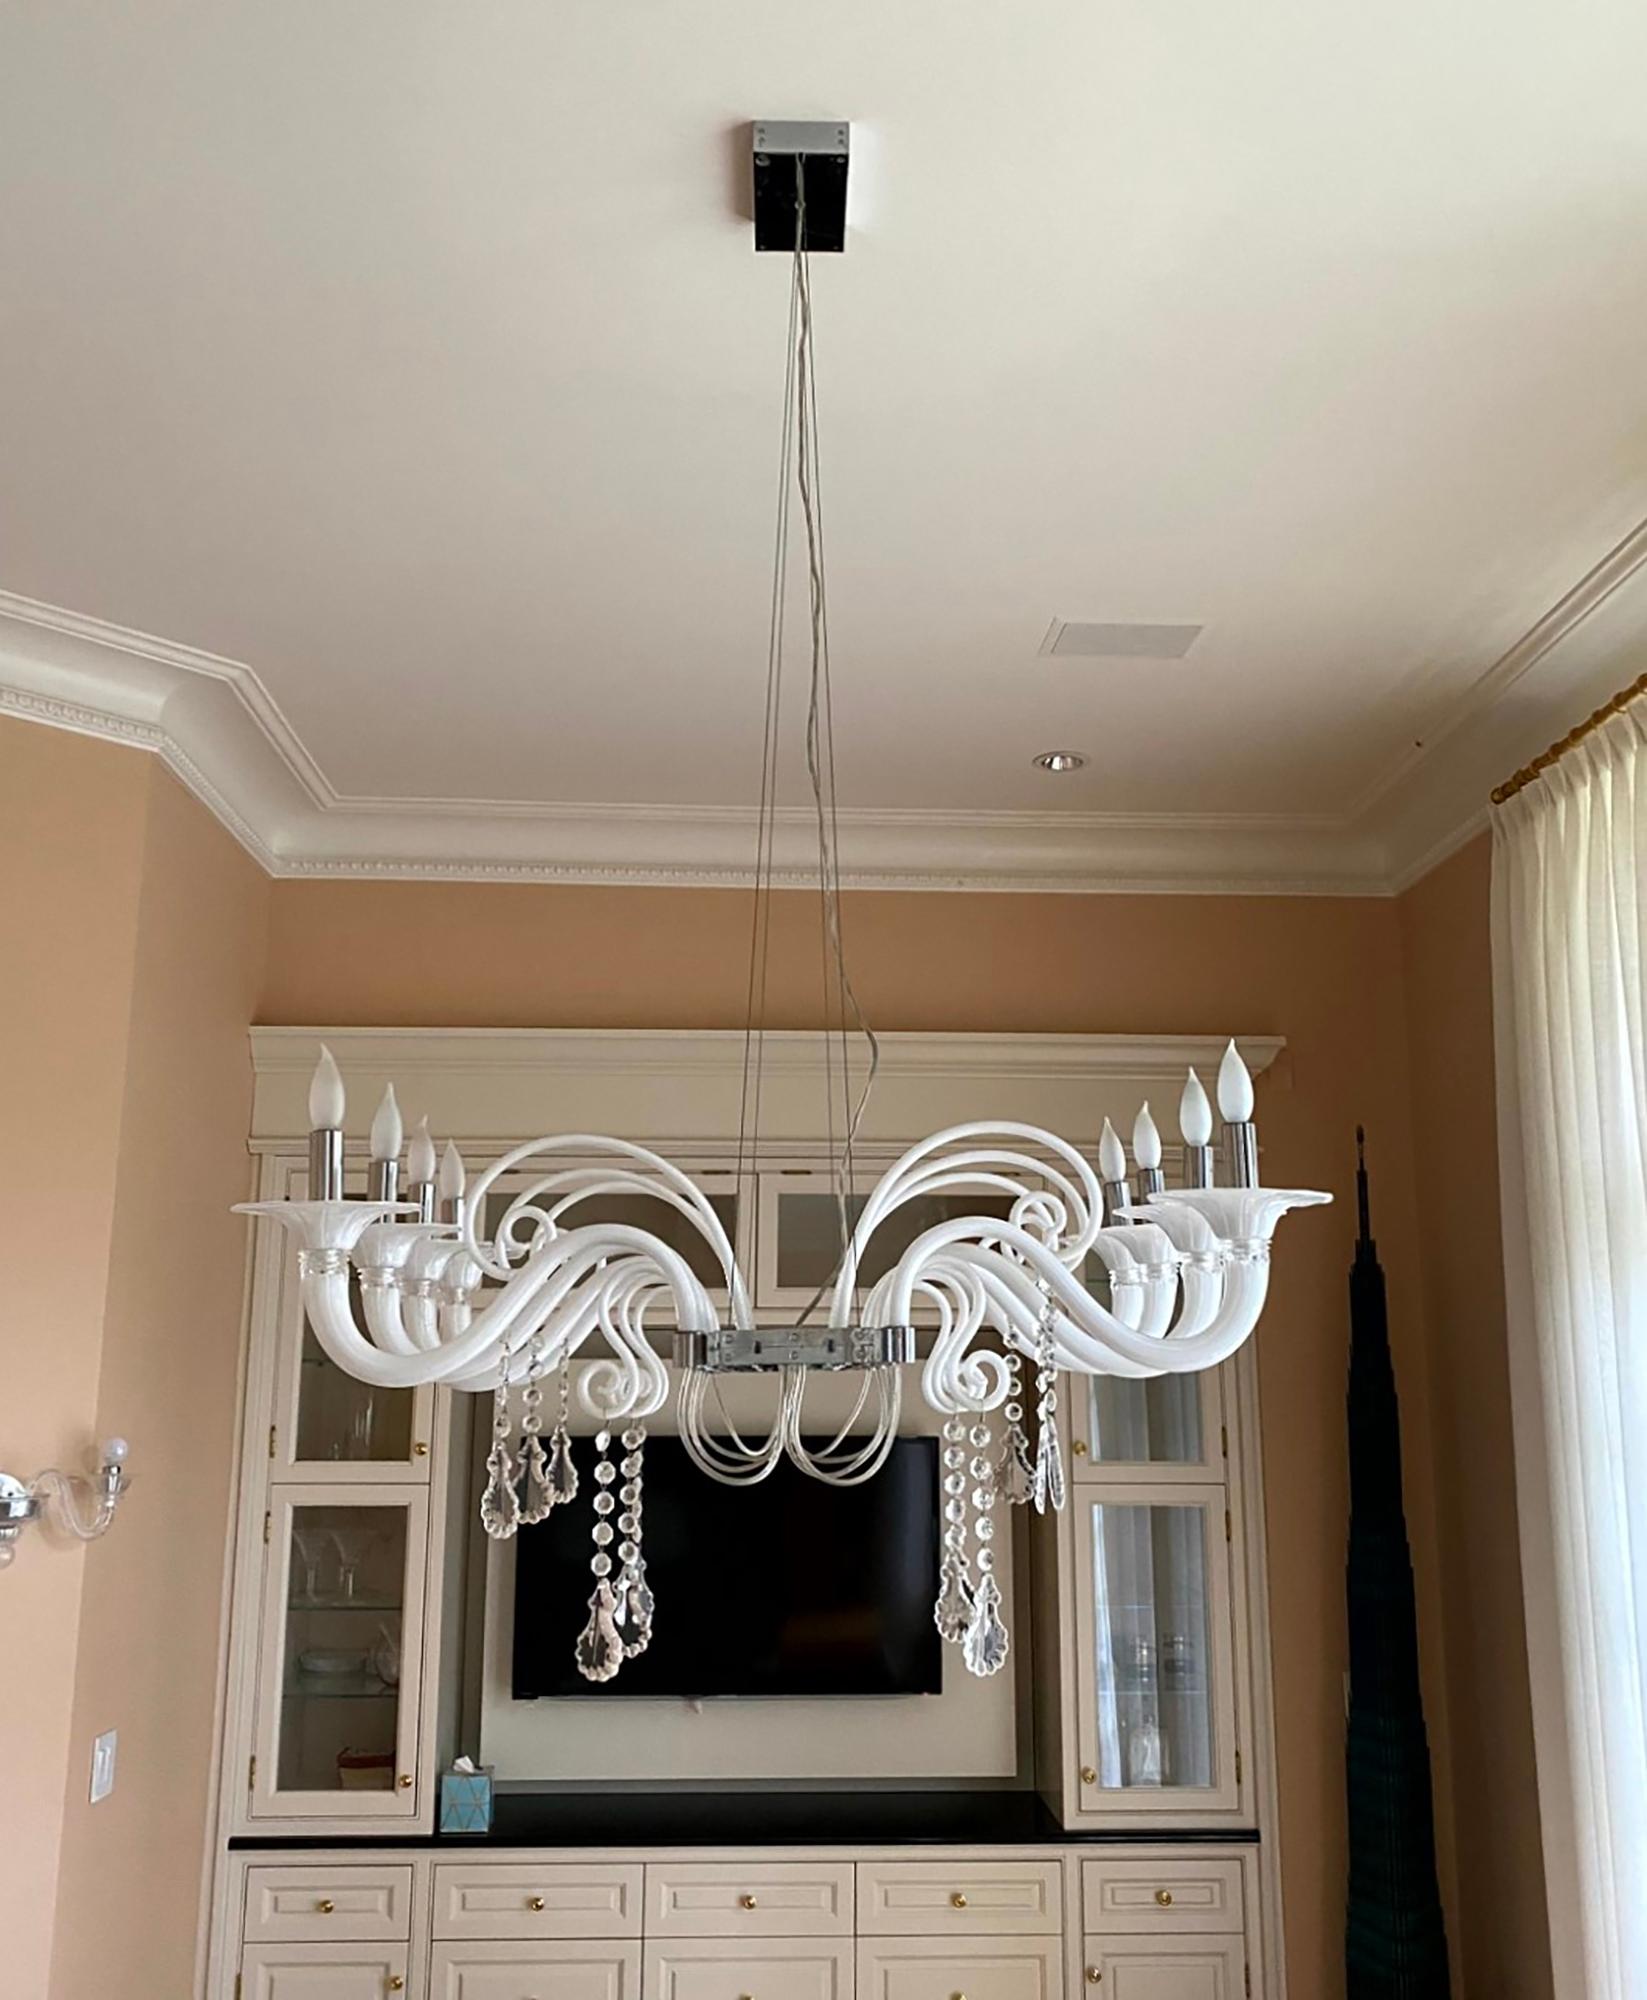 This unusual Contemporary chandelier, designed by Franco Raggi for Barovier & Toso, has eight white glass arms and stainless-steel hardware. It is draped with clear crystals on the bottom. This was retrieved from an estate located in Greenwich,